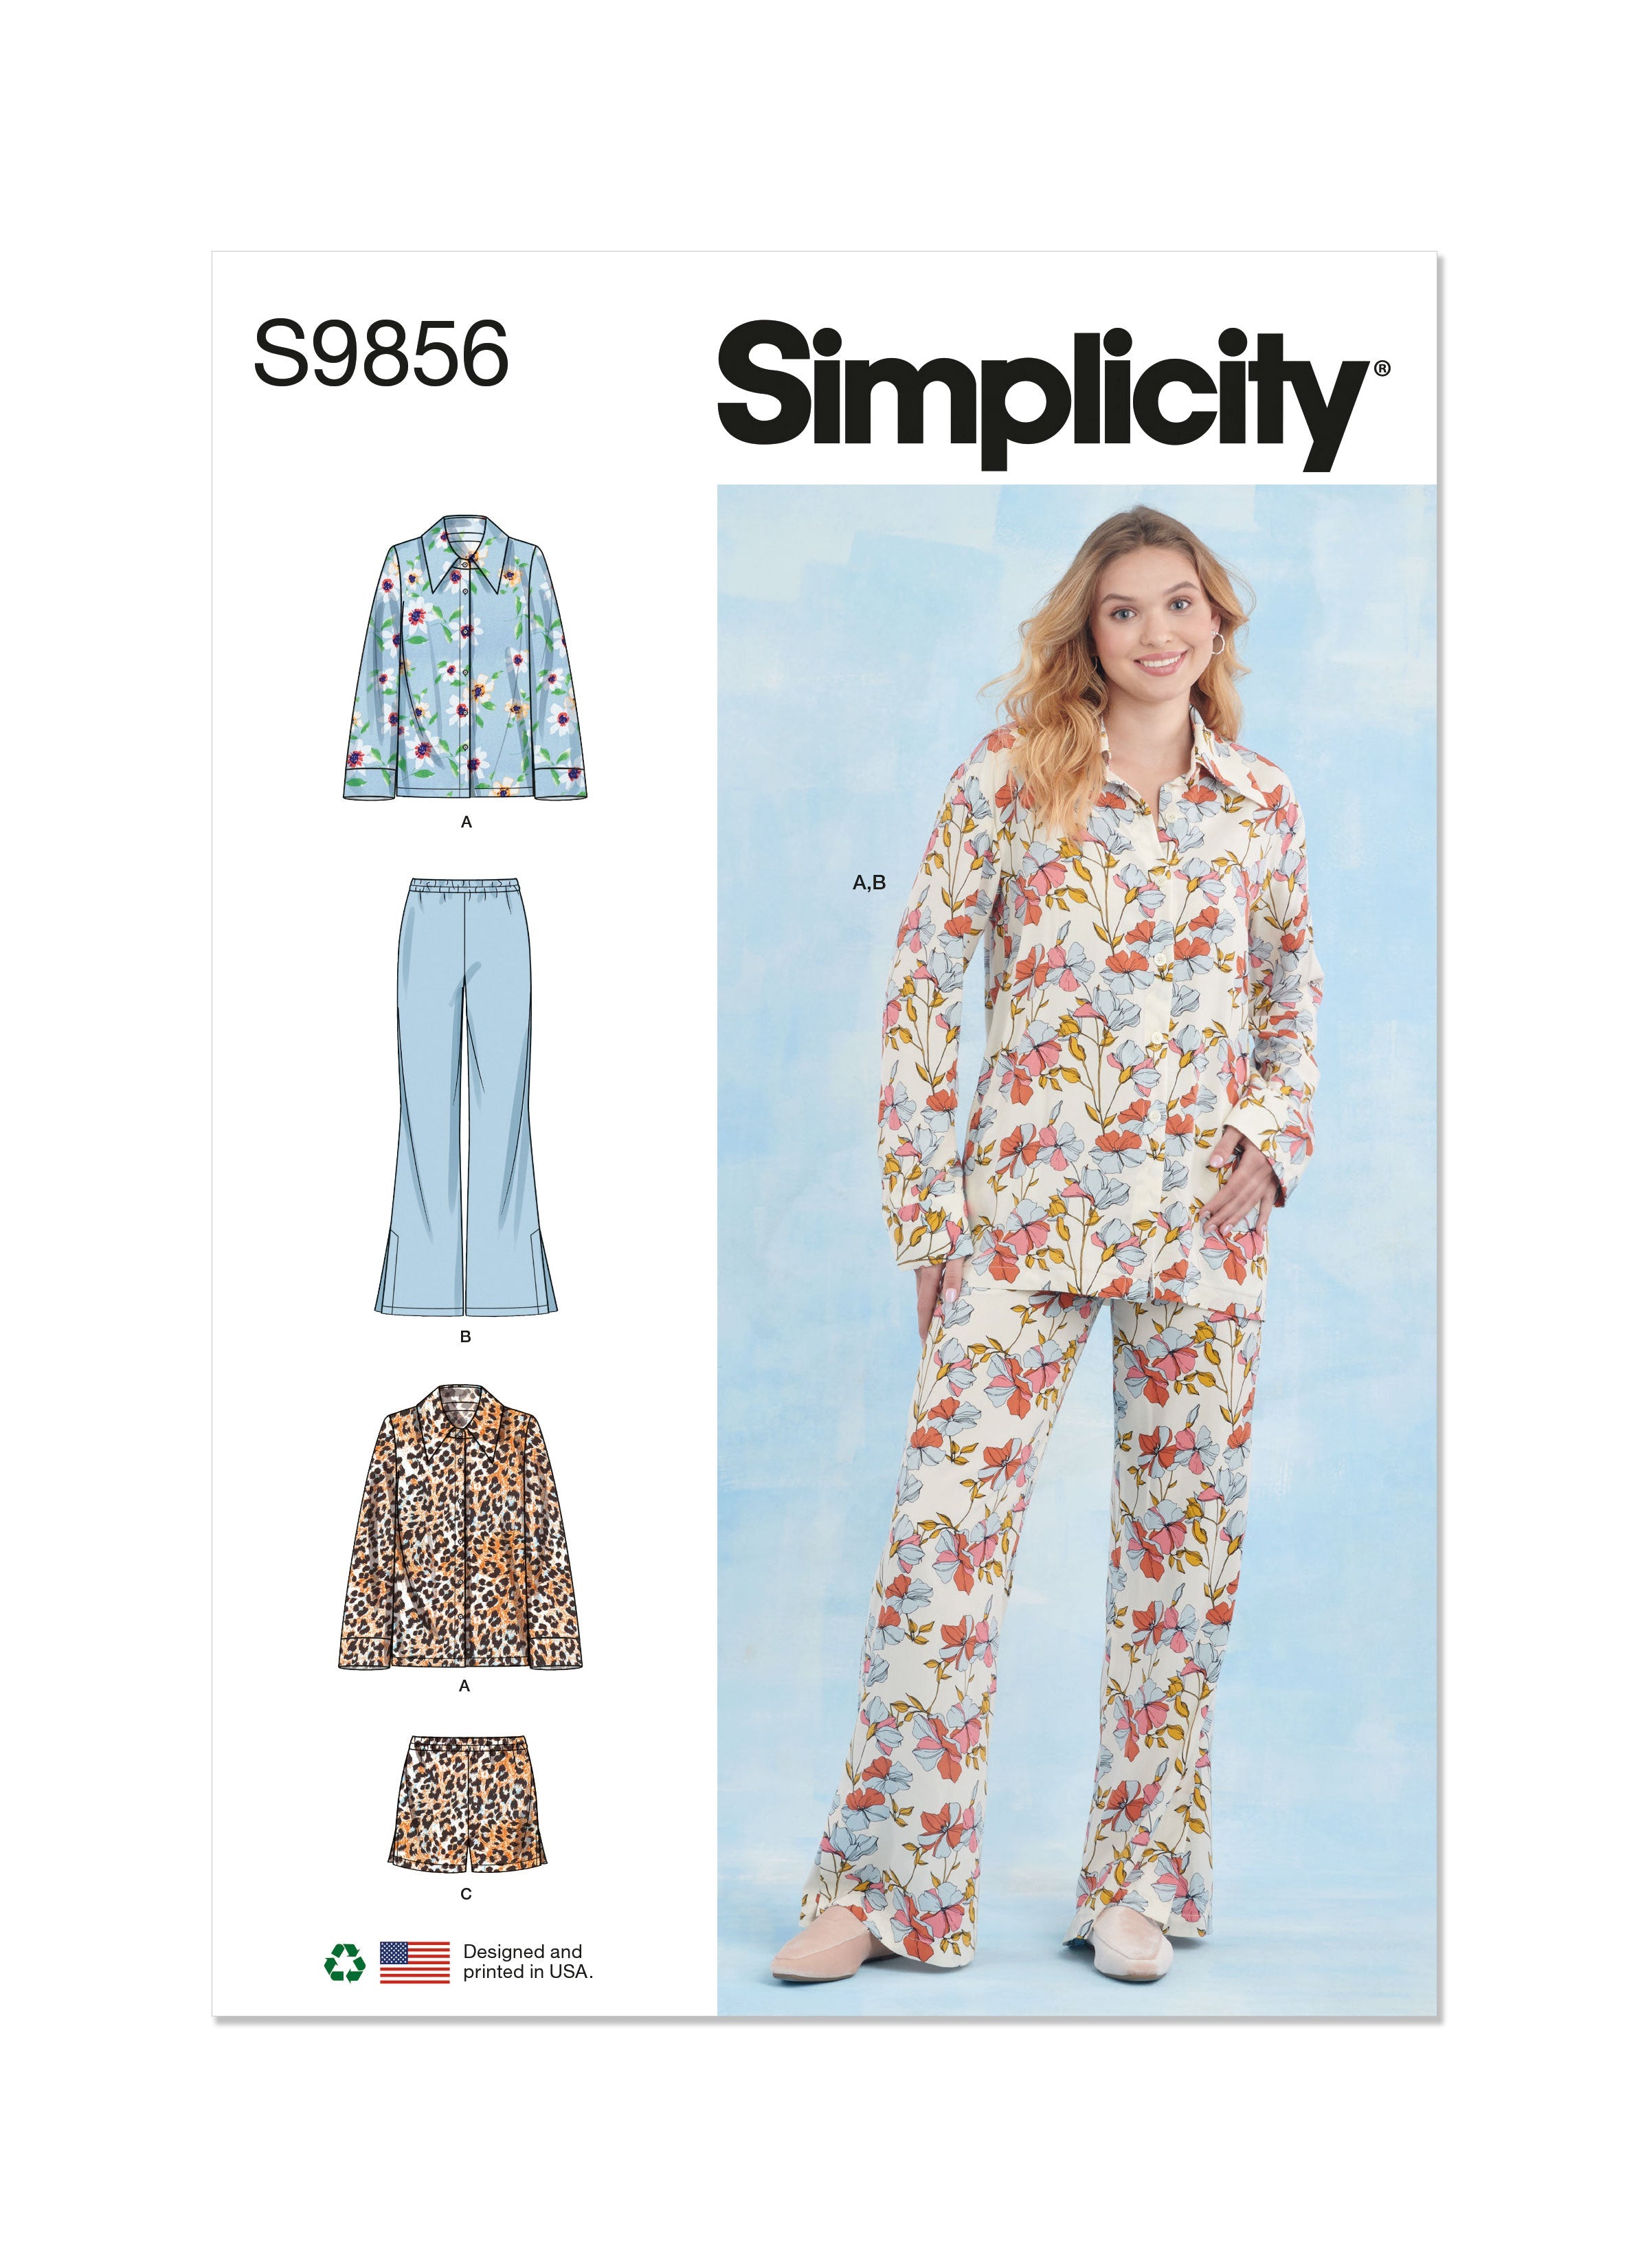 Simplicity Sewing Pattern 9856 Misses' Sleepwear from Jaycotts Sewing Supplies